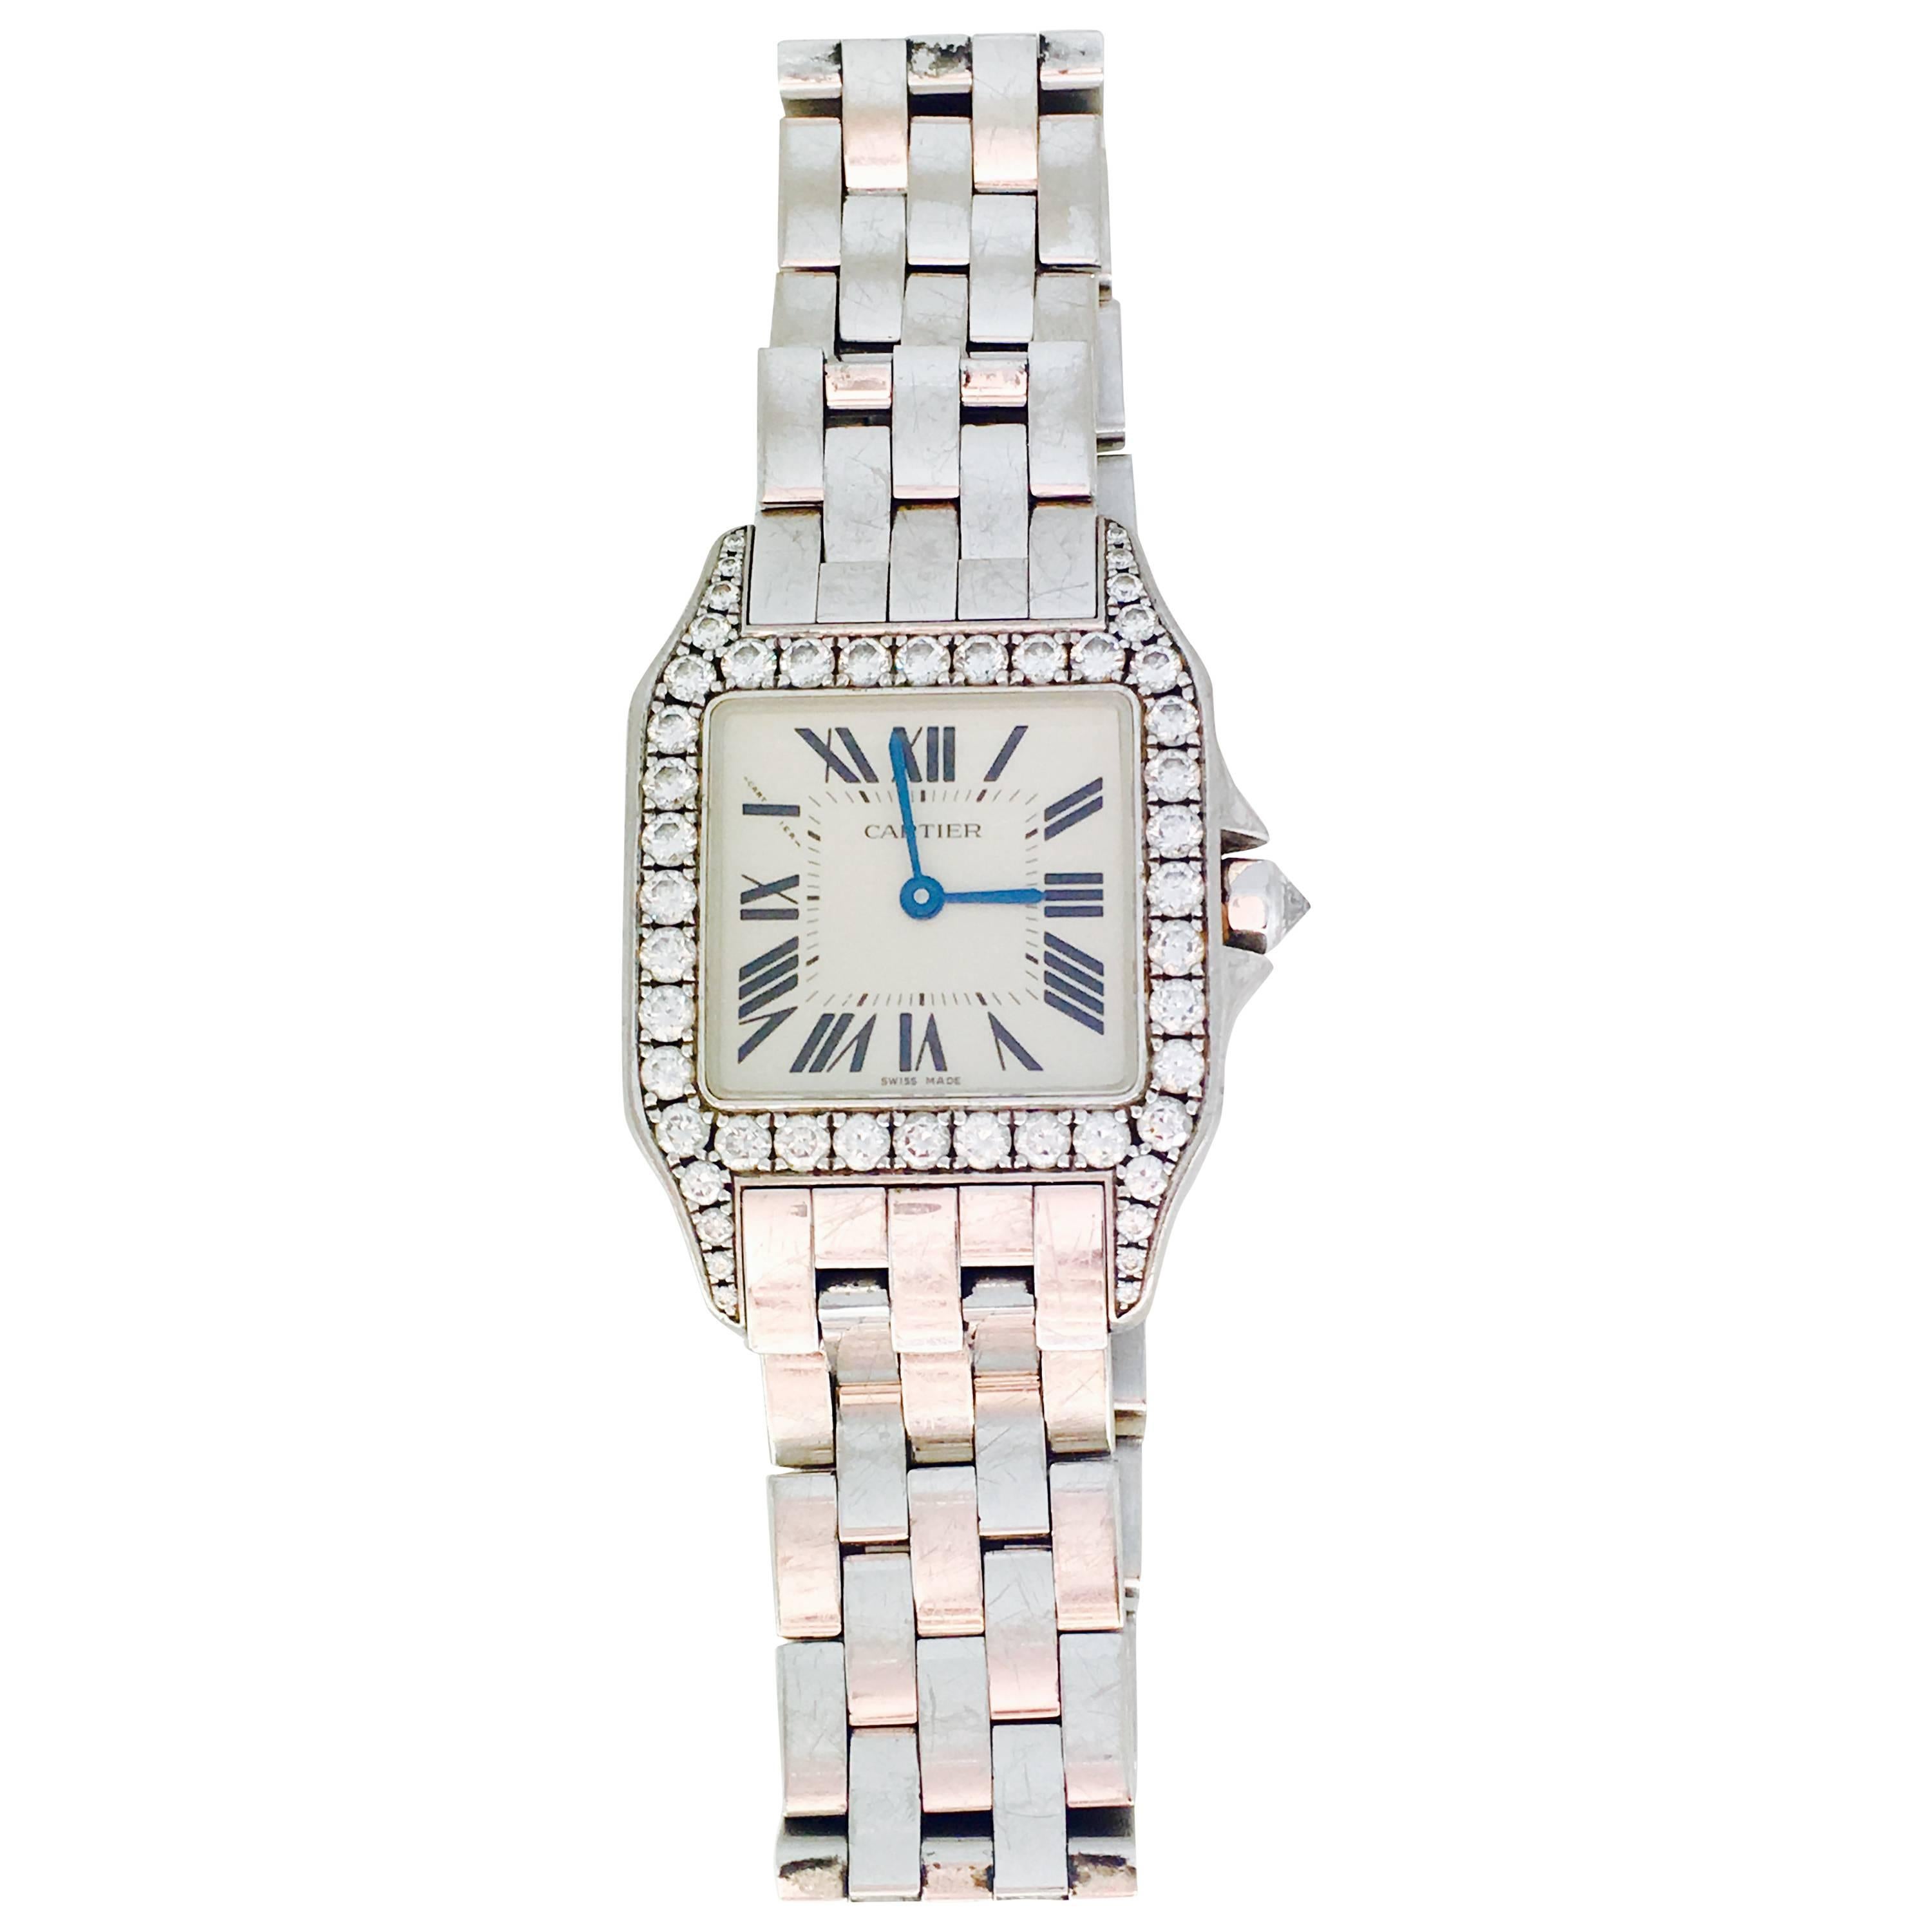 Cartier "Santos Damoiselle" White Gold and Diamond Watch